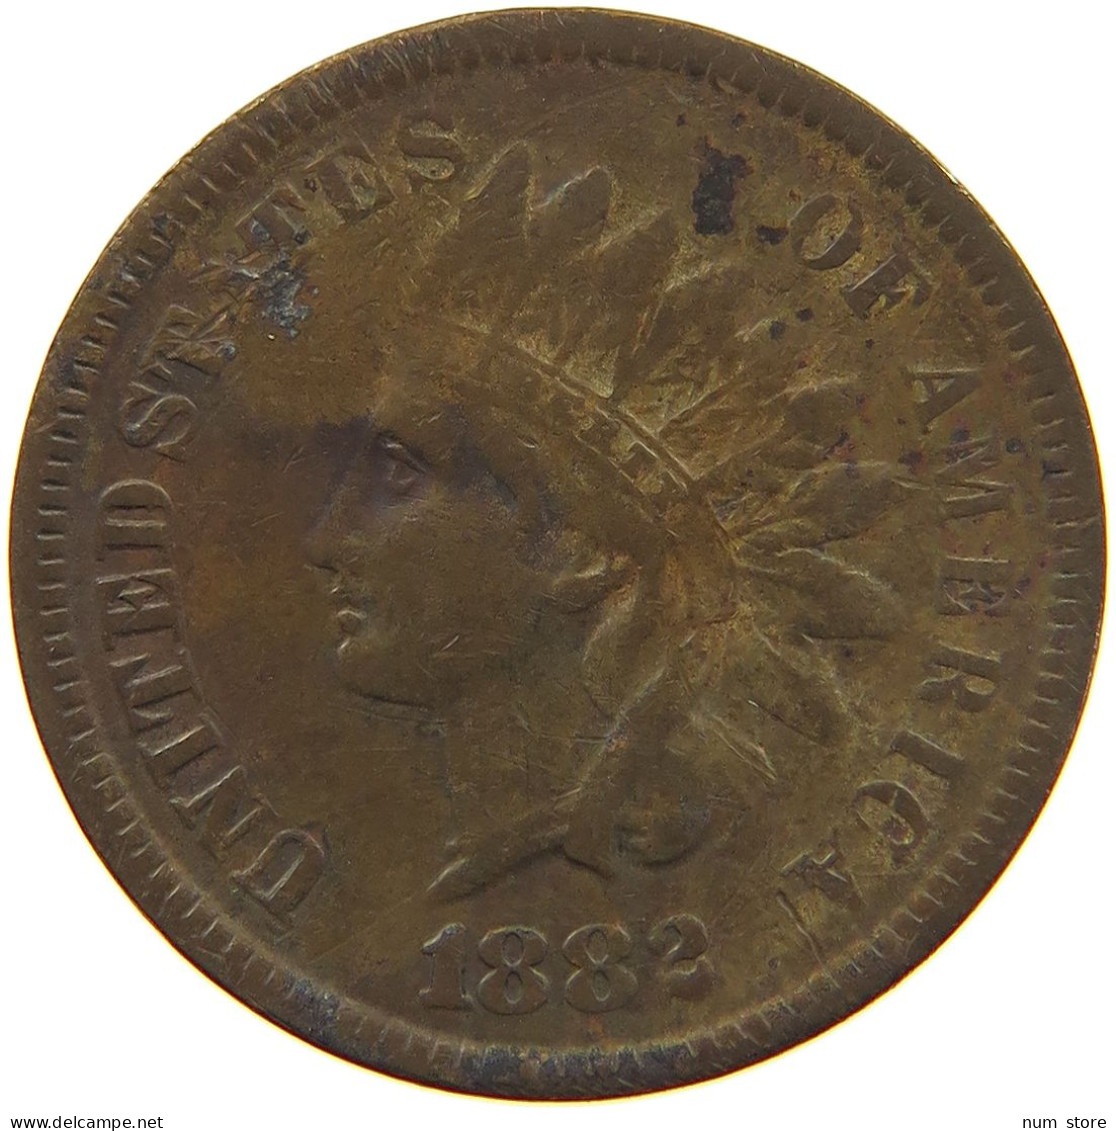 UNITED STATES OF AMERICA CENT 1882 INDIAN HEAD #t140 0355 - 1859-1909: Indian Head